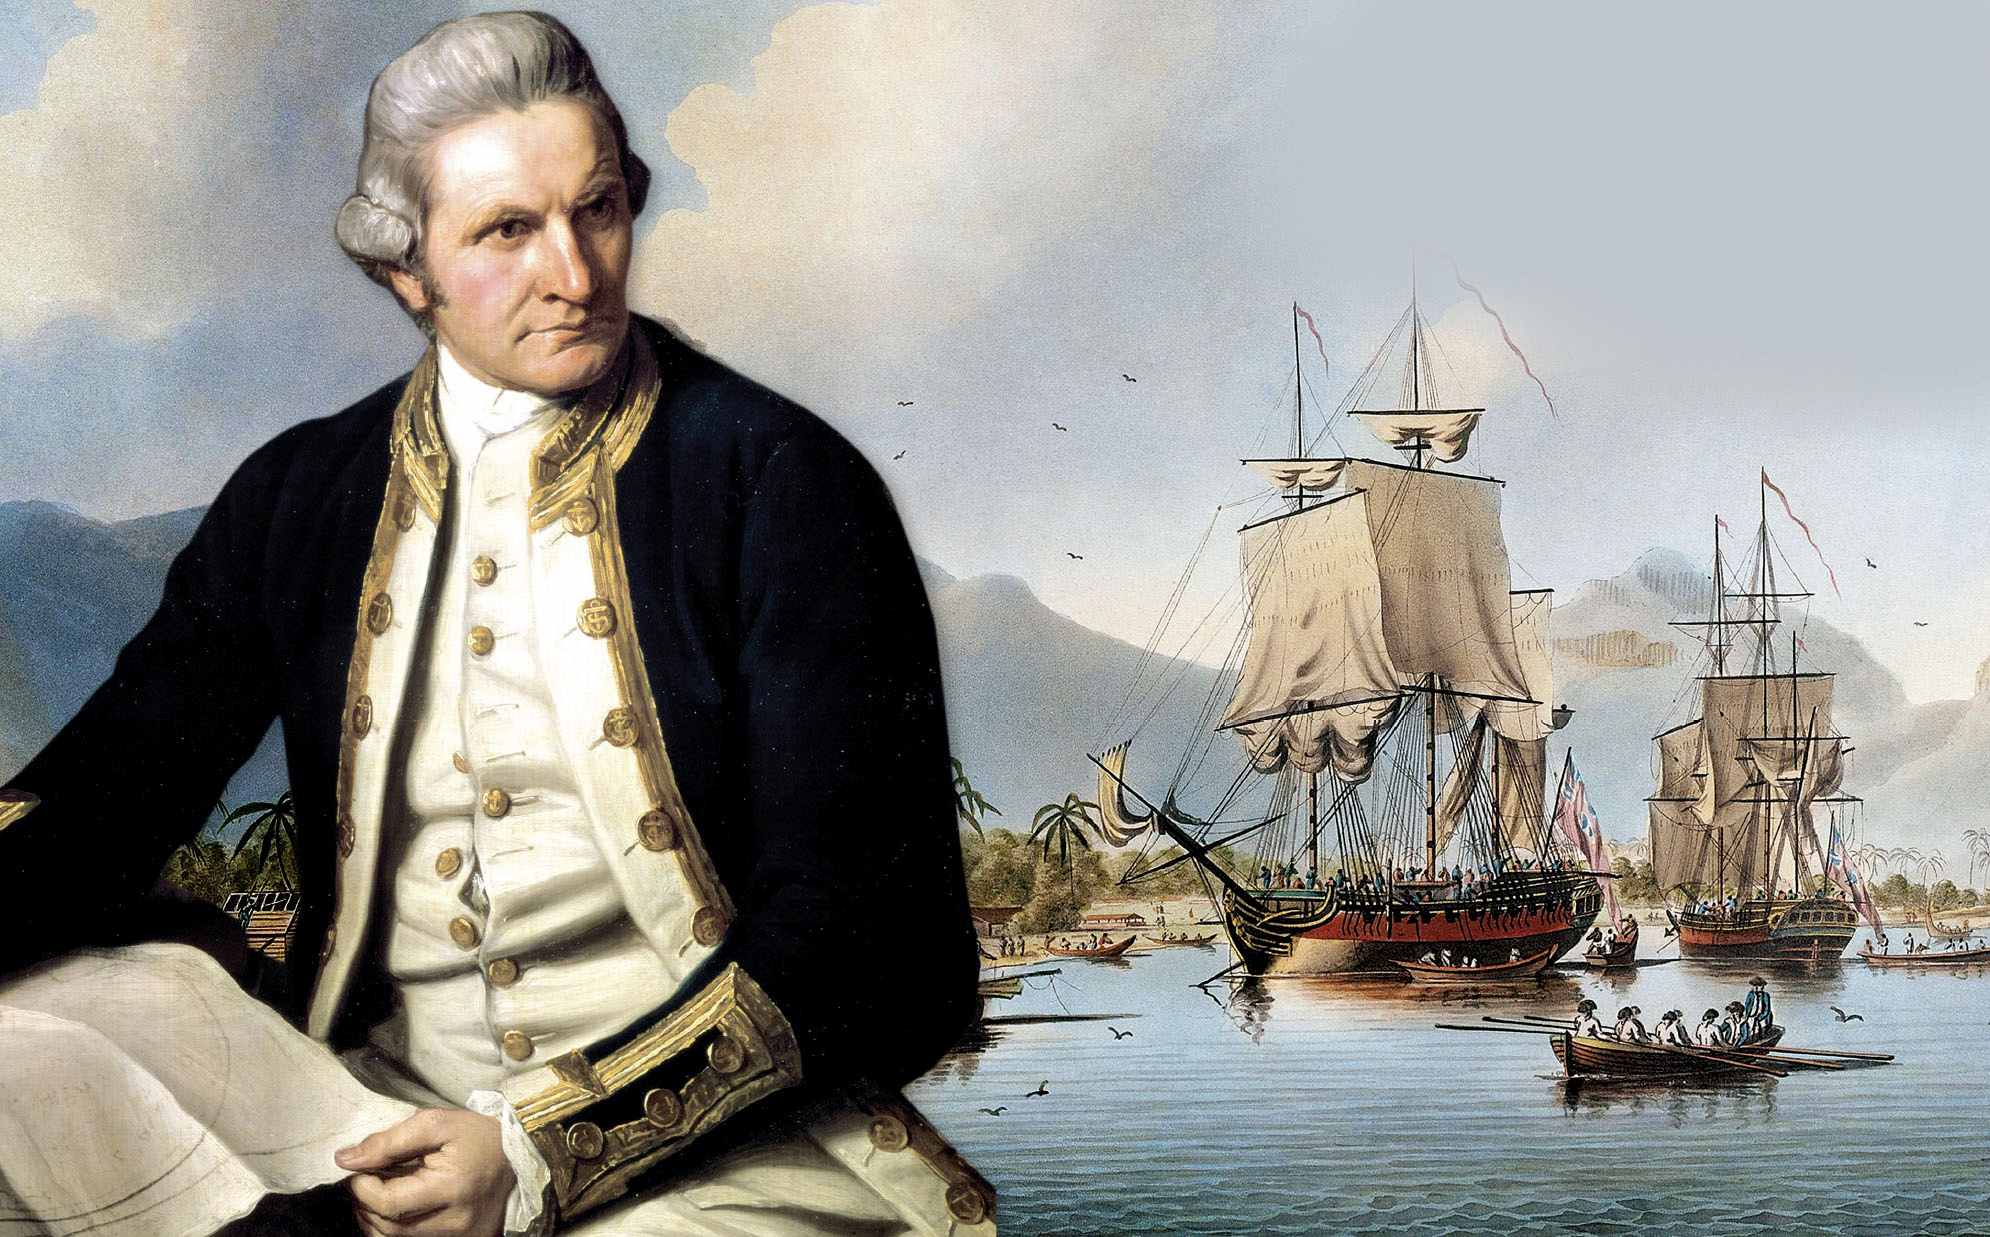 Captain James Cook RN used a cpy of John Harrisons's clock to may Australia